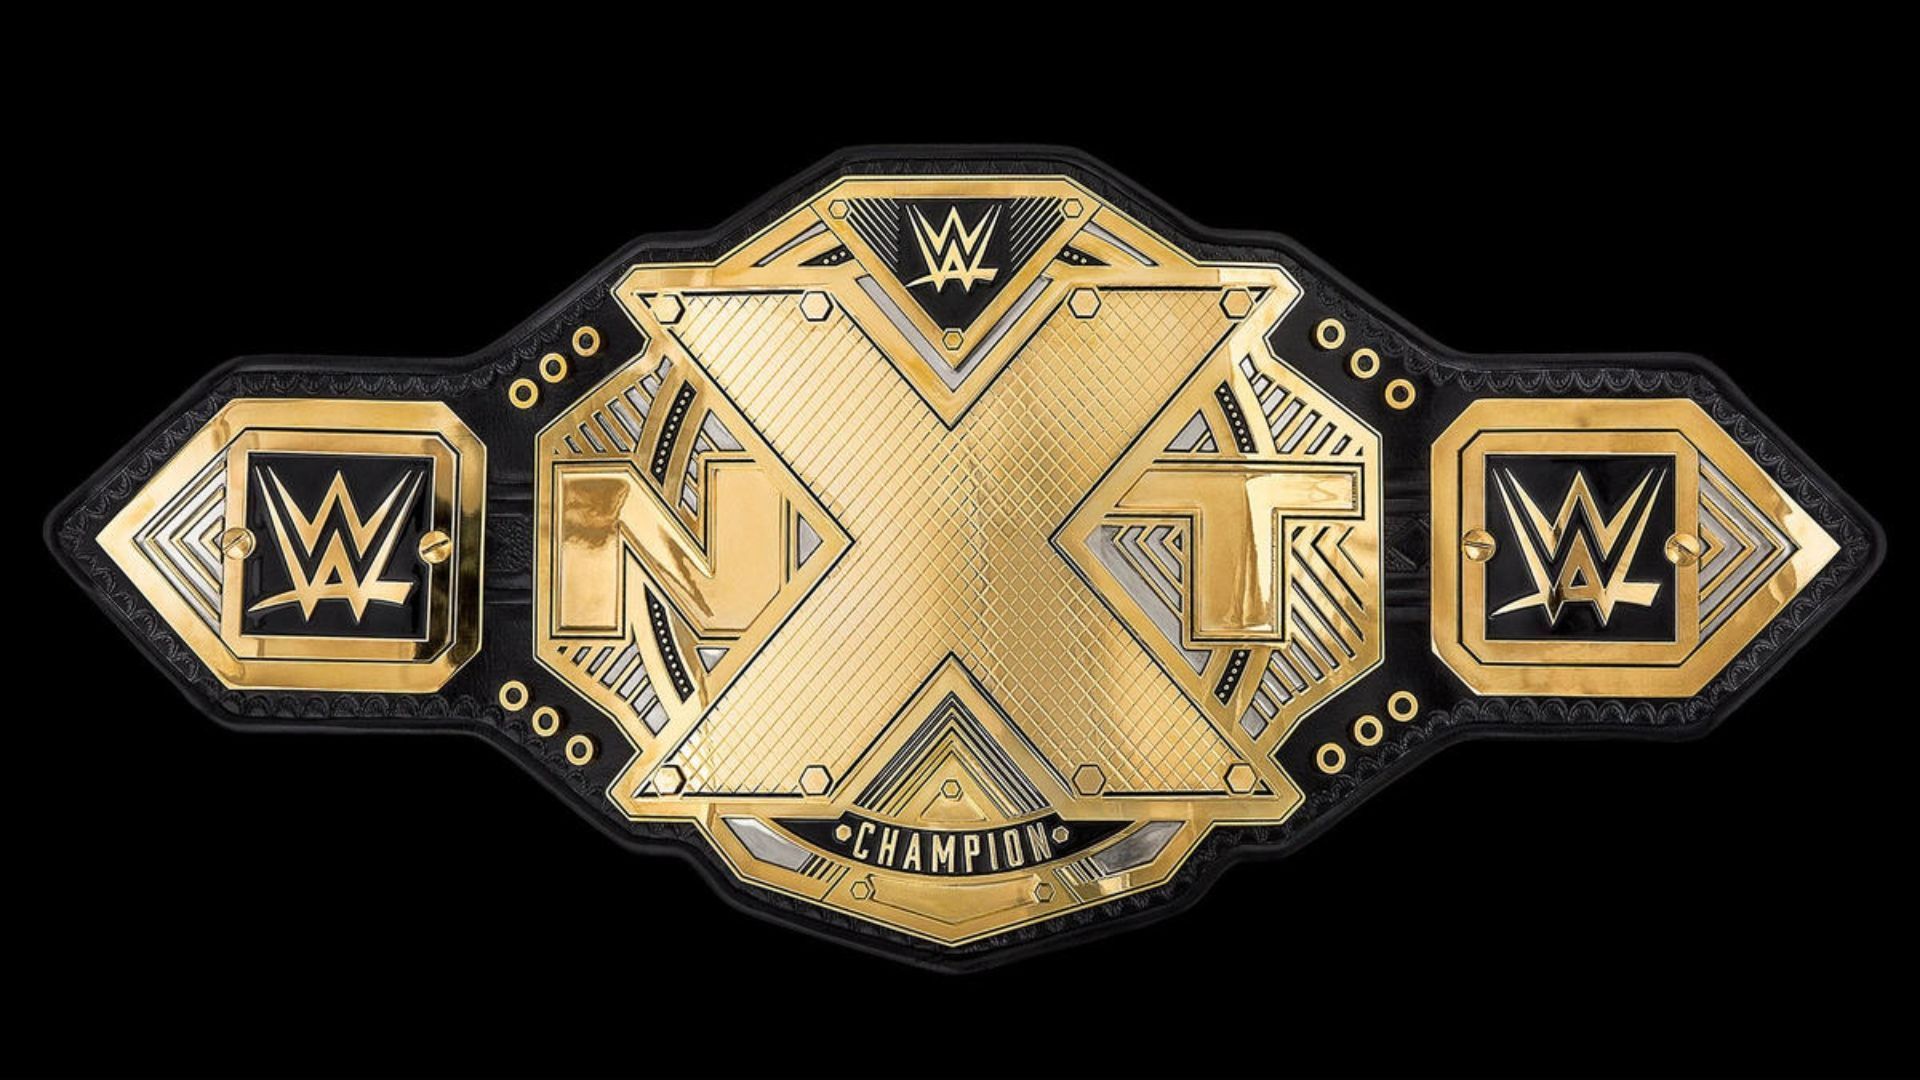 Who is the greatest NXT Champion of all time?